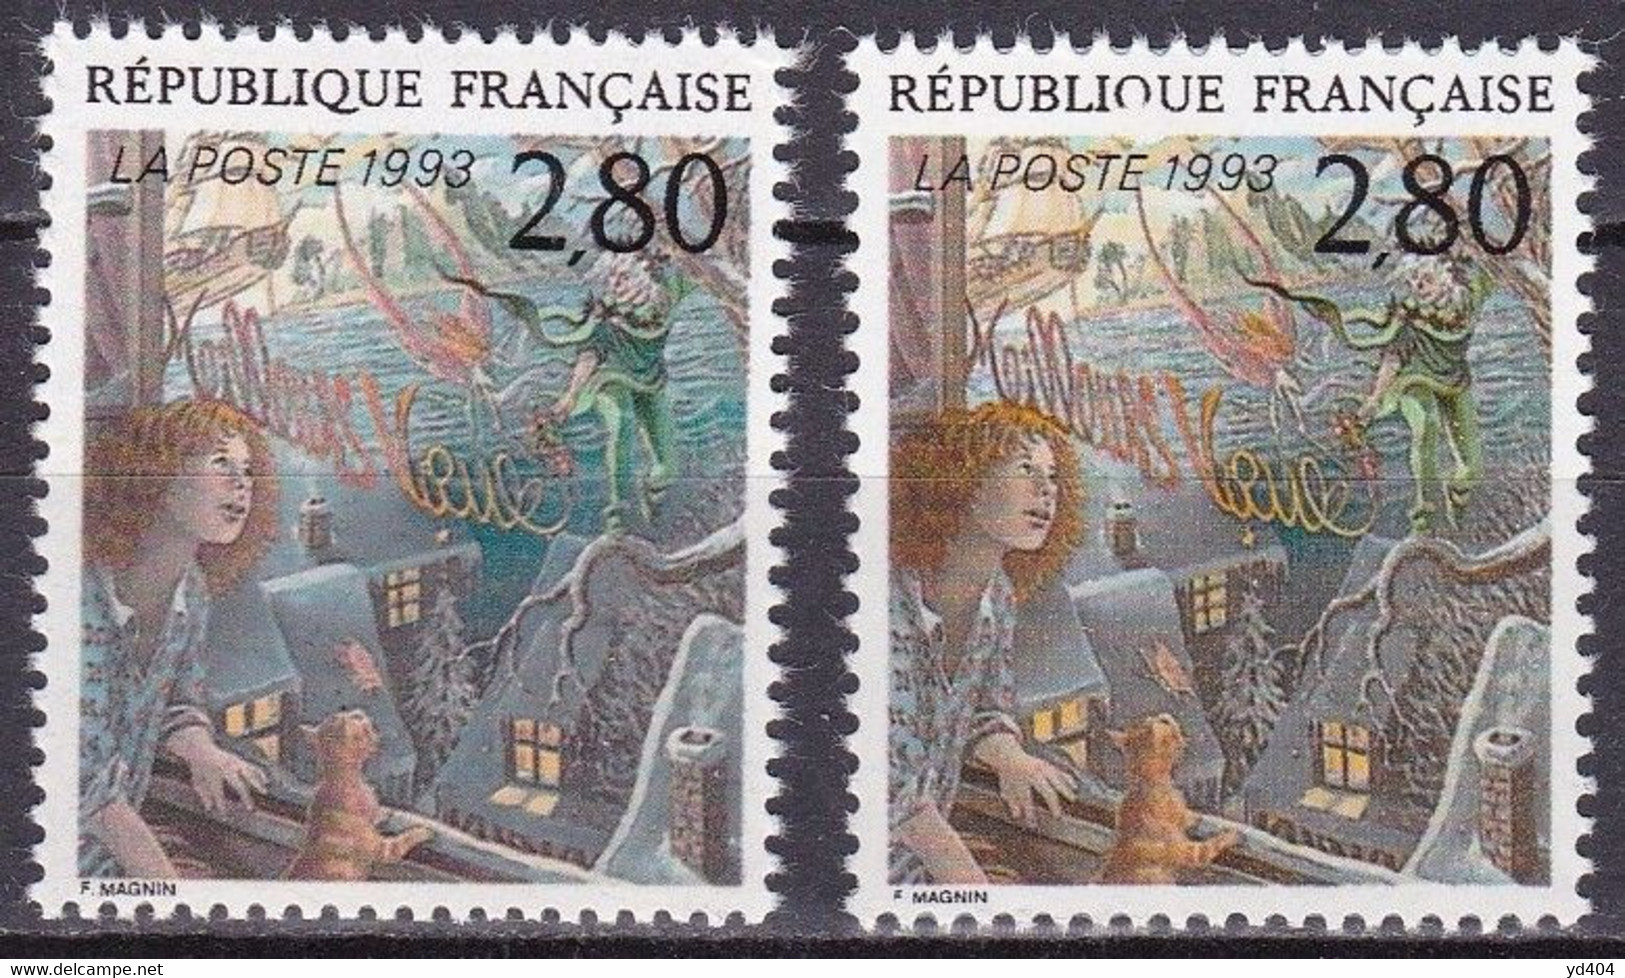 FR7616- FRANCE – 1993 – PLEASURE OF WRITING - Y&T # 2845(x2) MNH - Unused Stamps